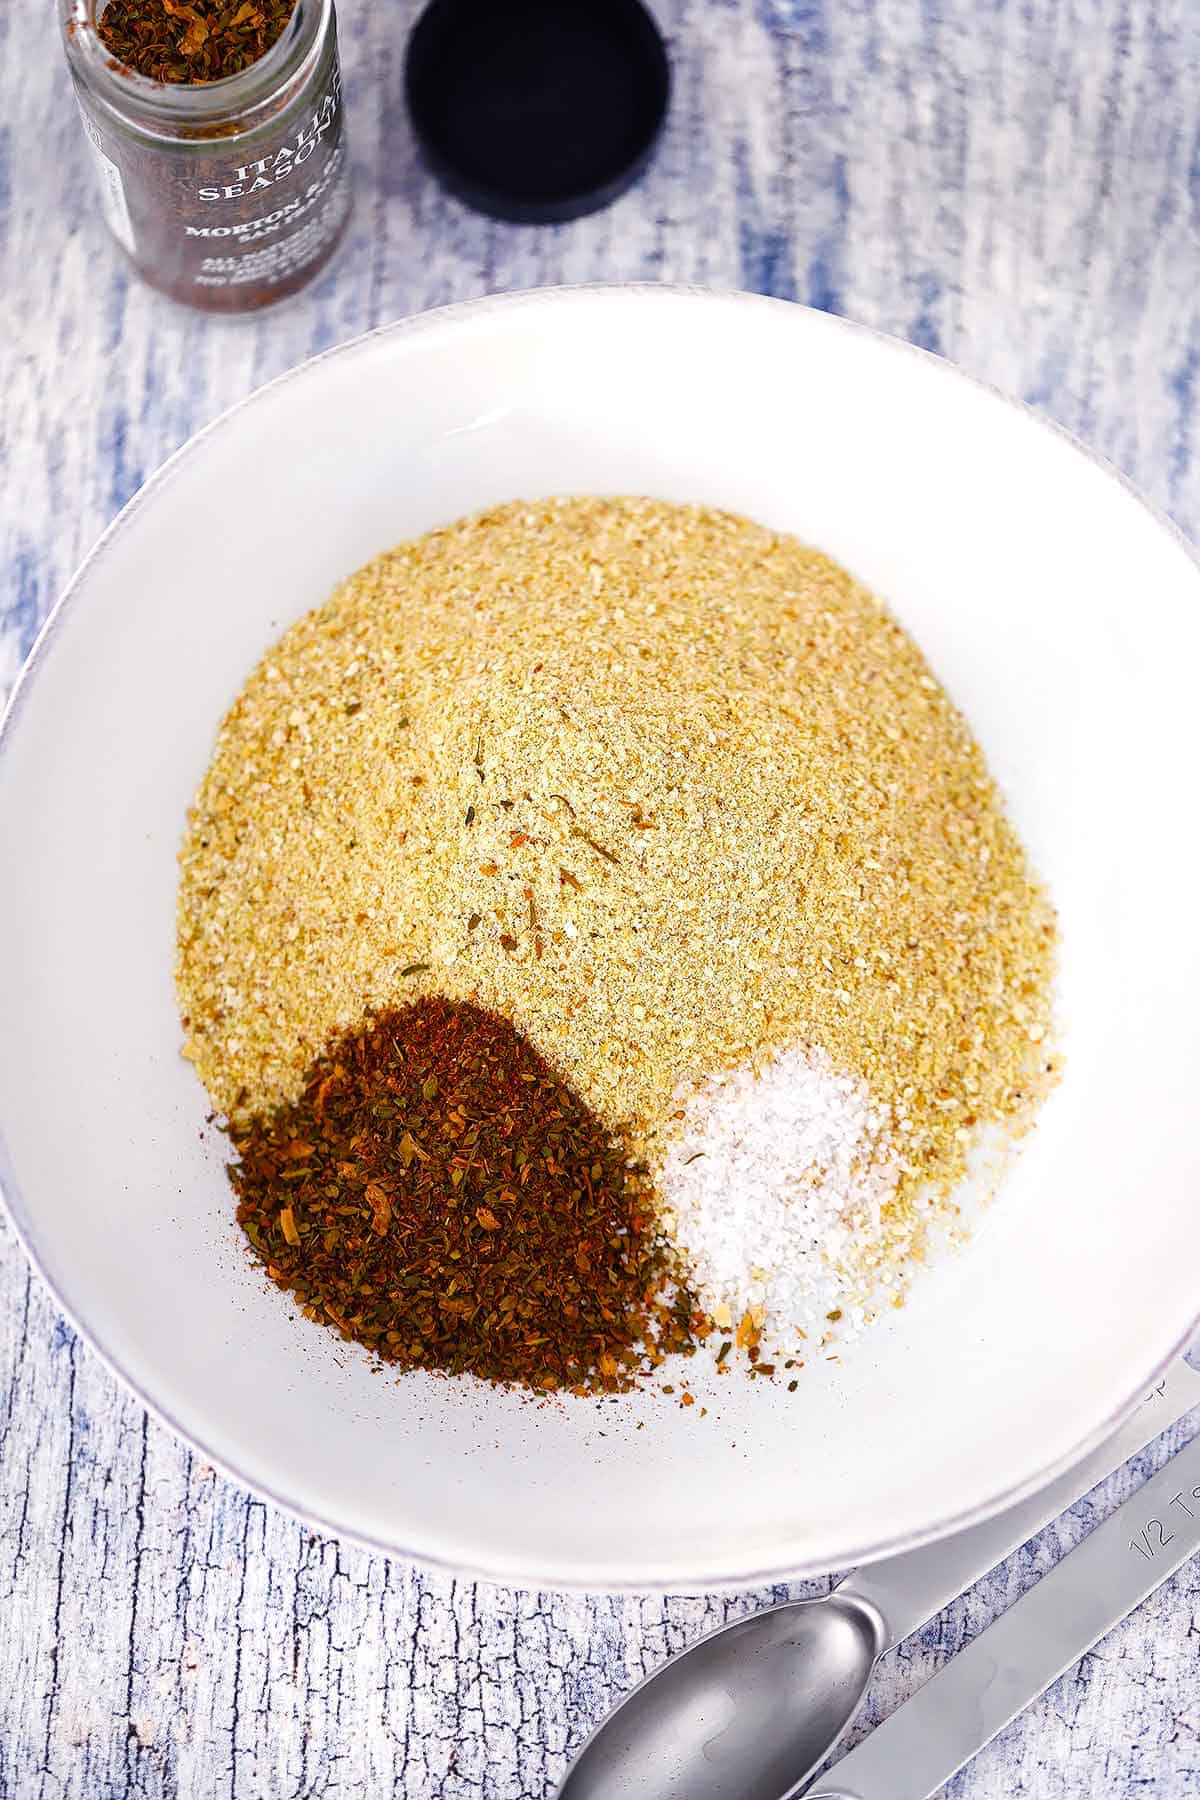 The ingredients for homemade Italian seasoned bread crumbs - plain bread crumbs, Italian seasoning, and salt - in a white bowl.